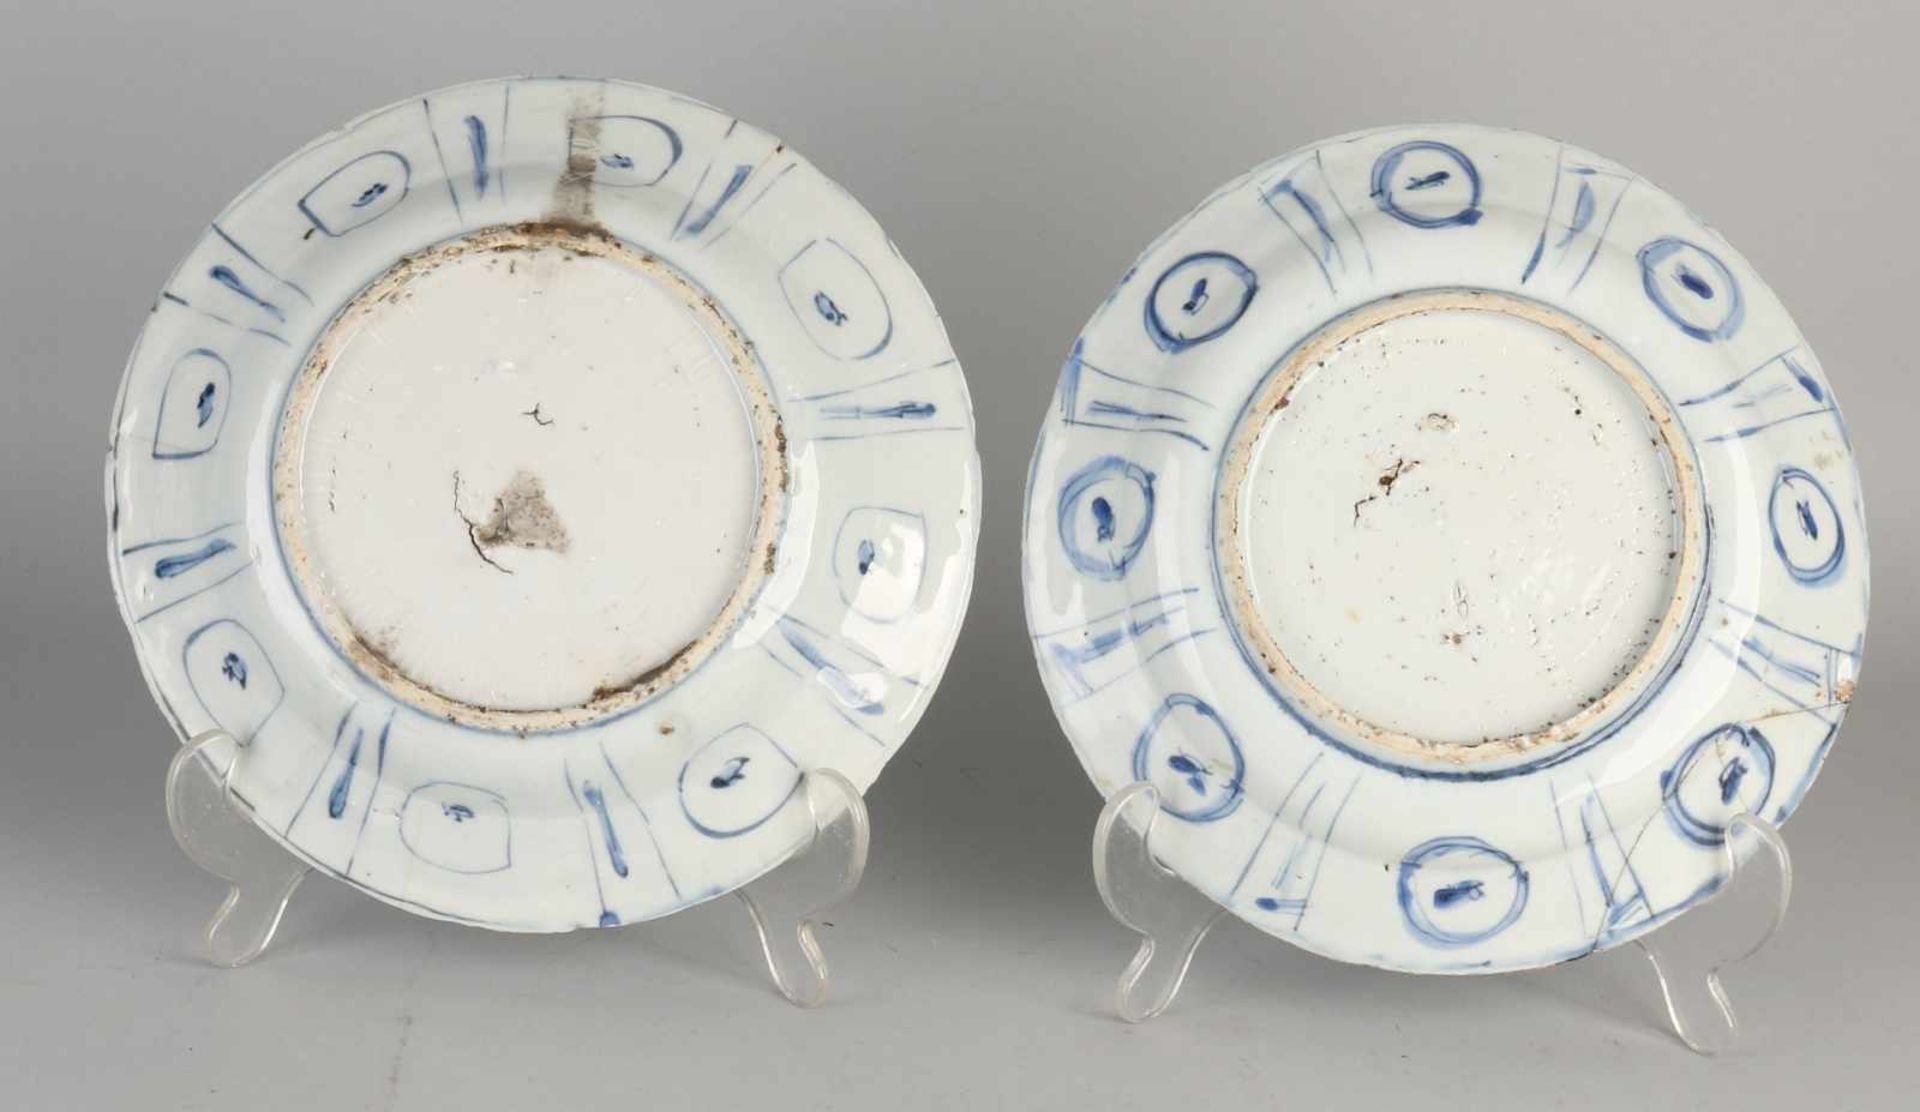 Two 17th century Chinese porcelain plates Wanli. Both damaged. Size: Ø 21 - 21.5 cm. In reasonable - Bild 2 aus 2